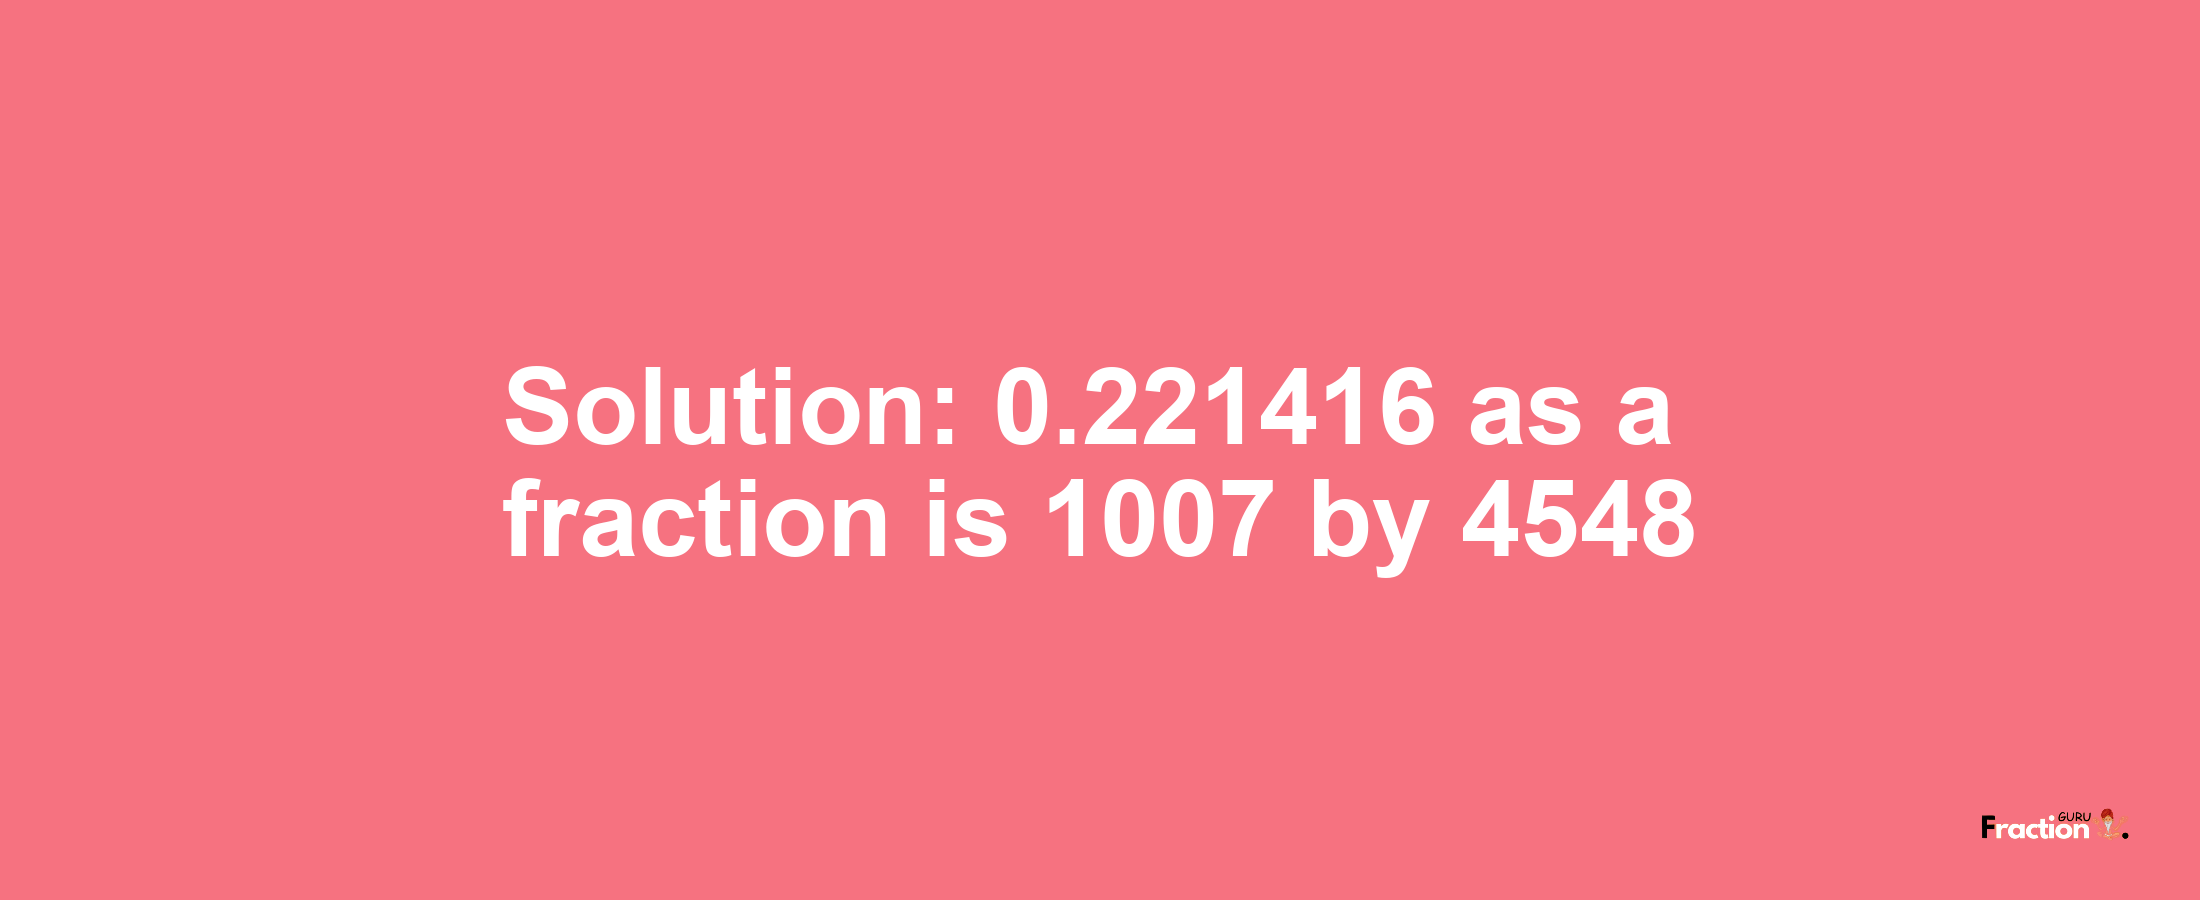 Solution:0.221416 as a fraction is 1007/4548